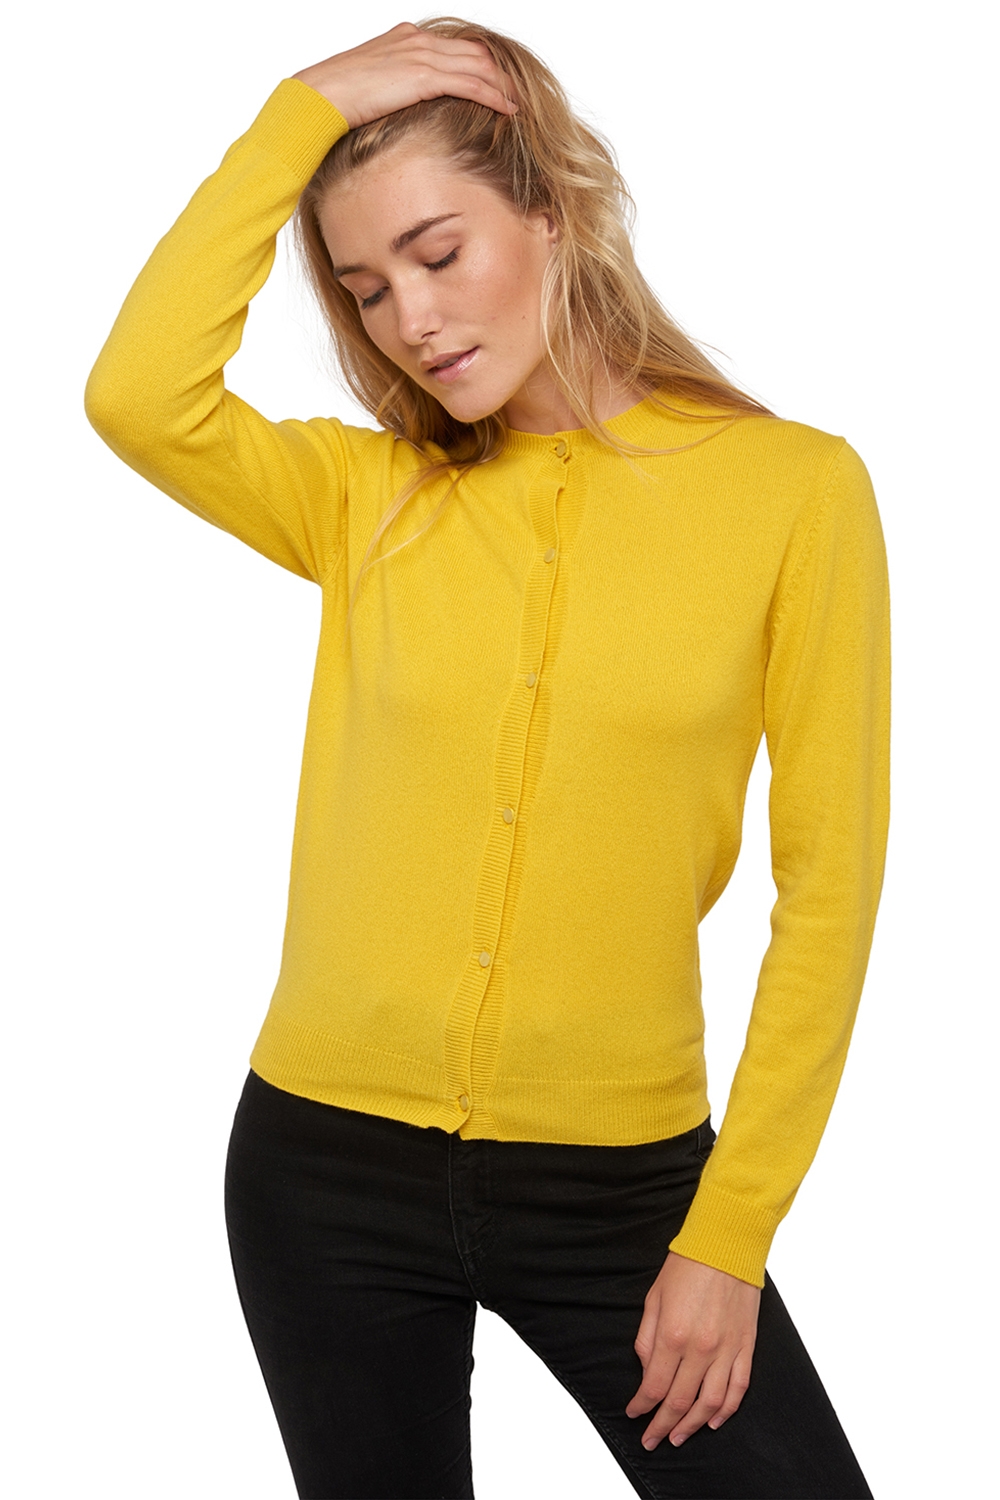 Cachemire pull femme collection printemps ete tyra first sunny yellow s